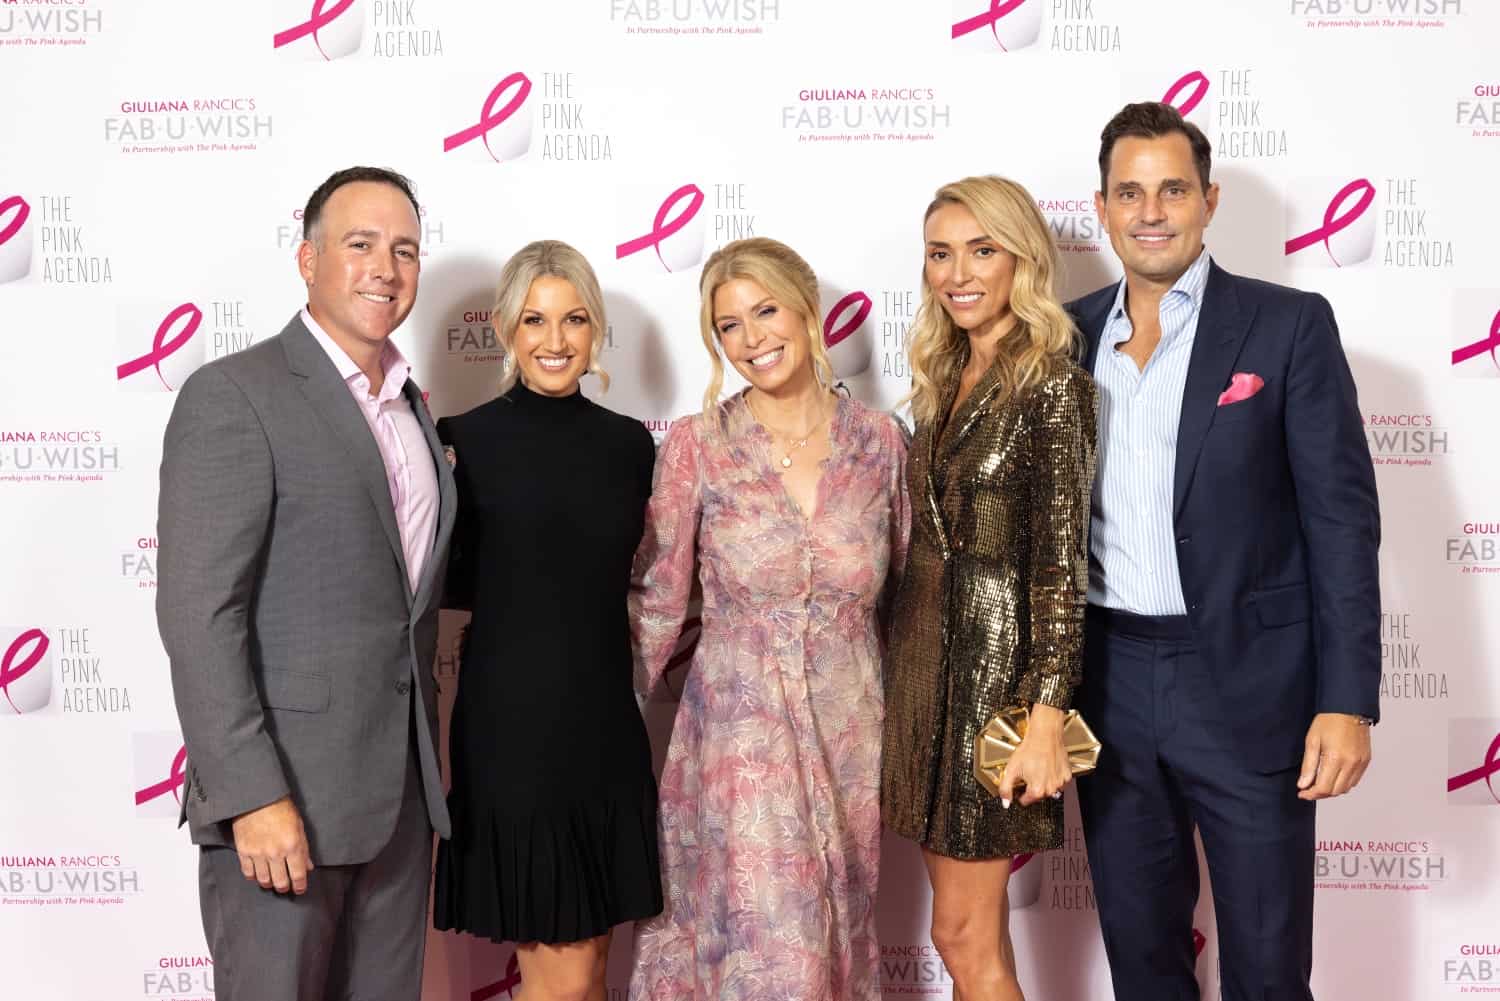 The Pink Agenda’s 15th Annual Gala Hosted By Giuliana & Bill Rancic Raised Over $280,000